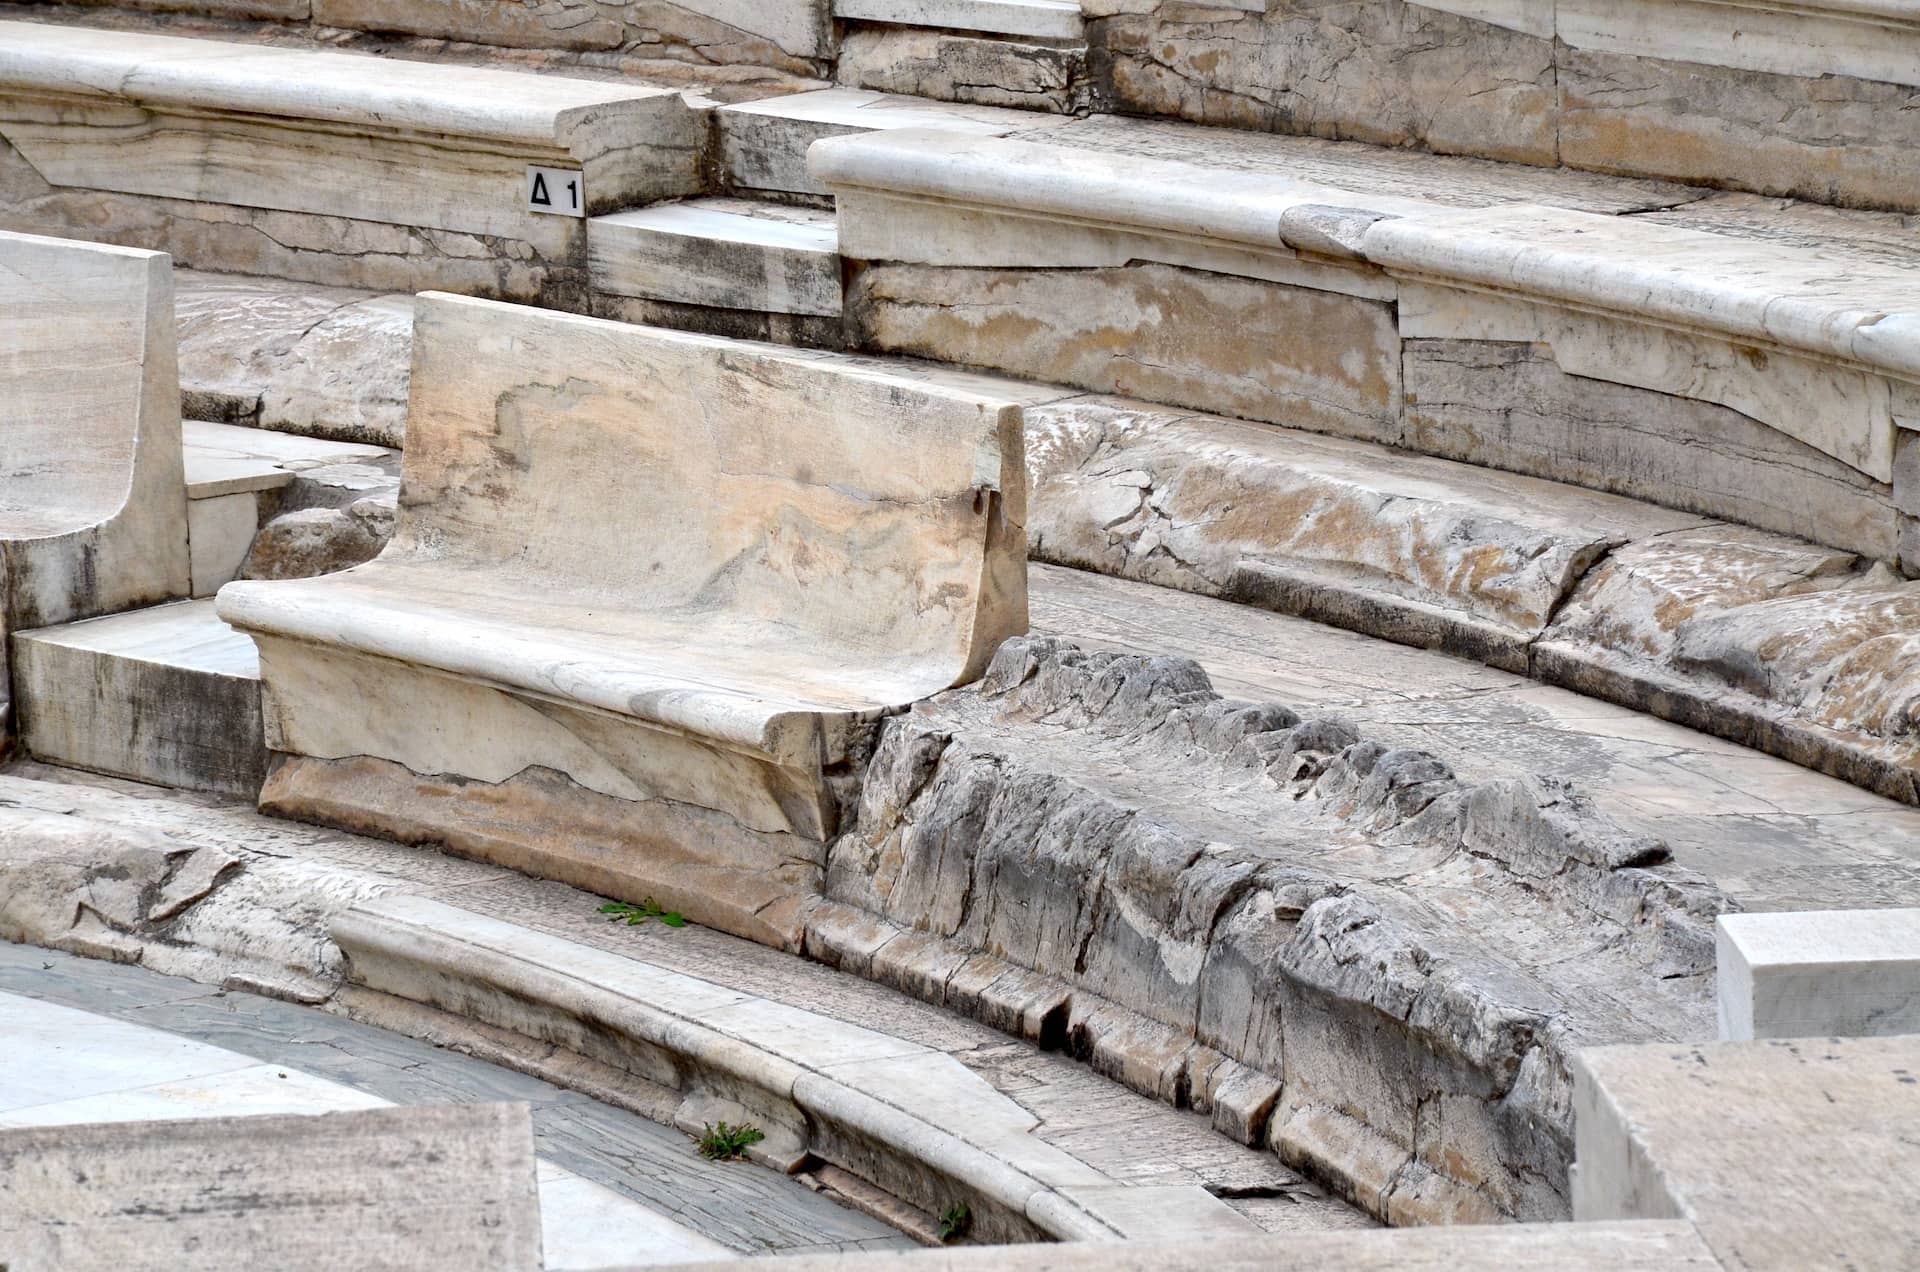 Original seating of the Odeon of Herodes Atticus on the south slope on the Acropolis in Athens, Greece